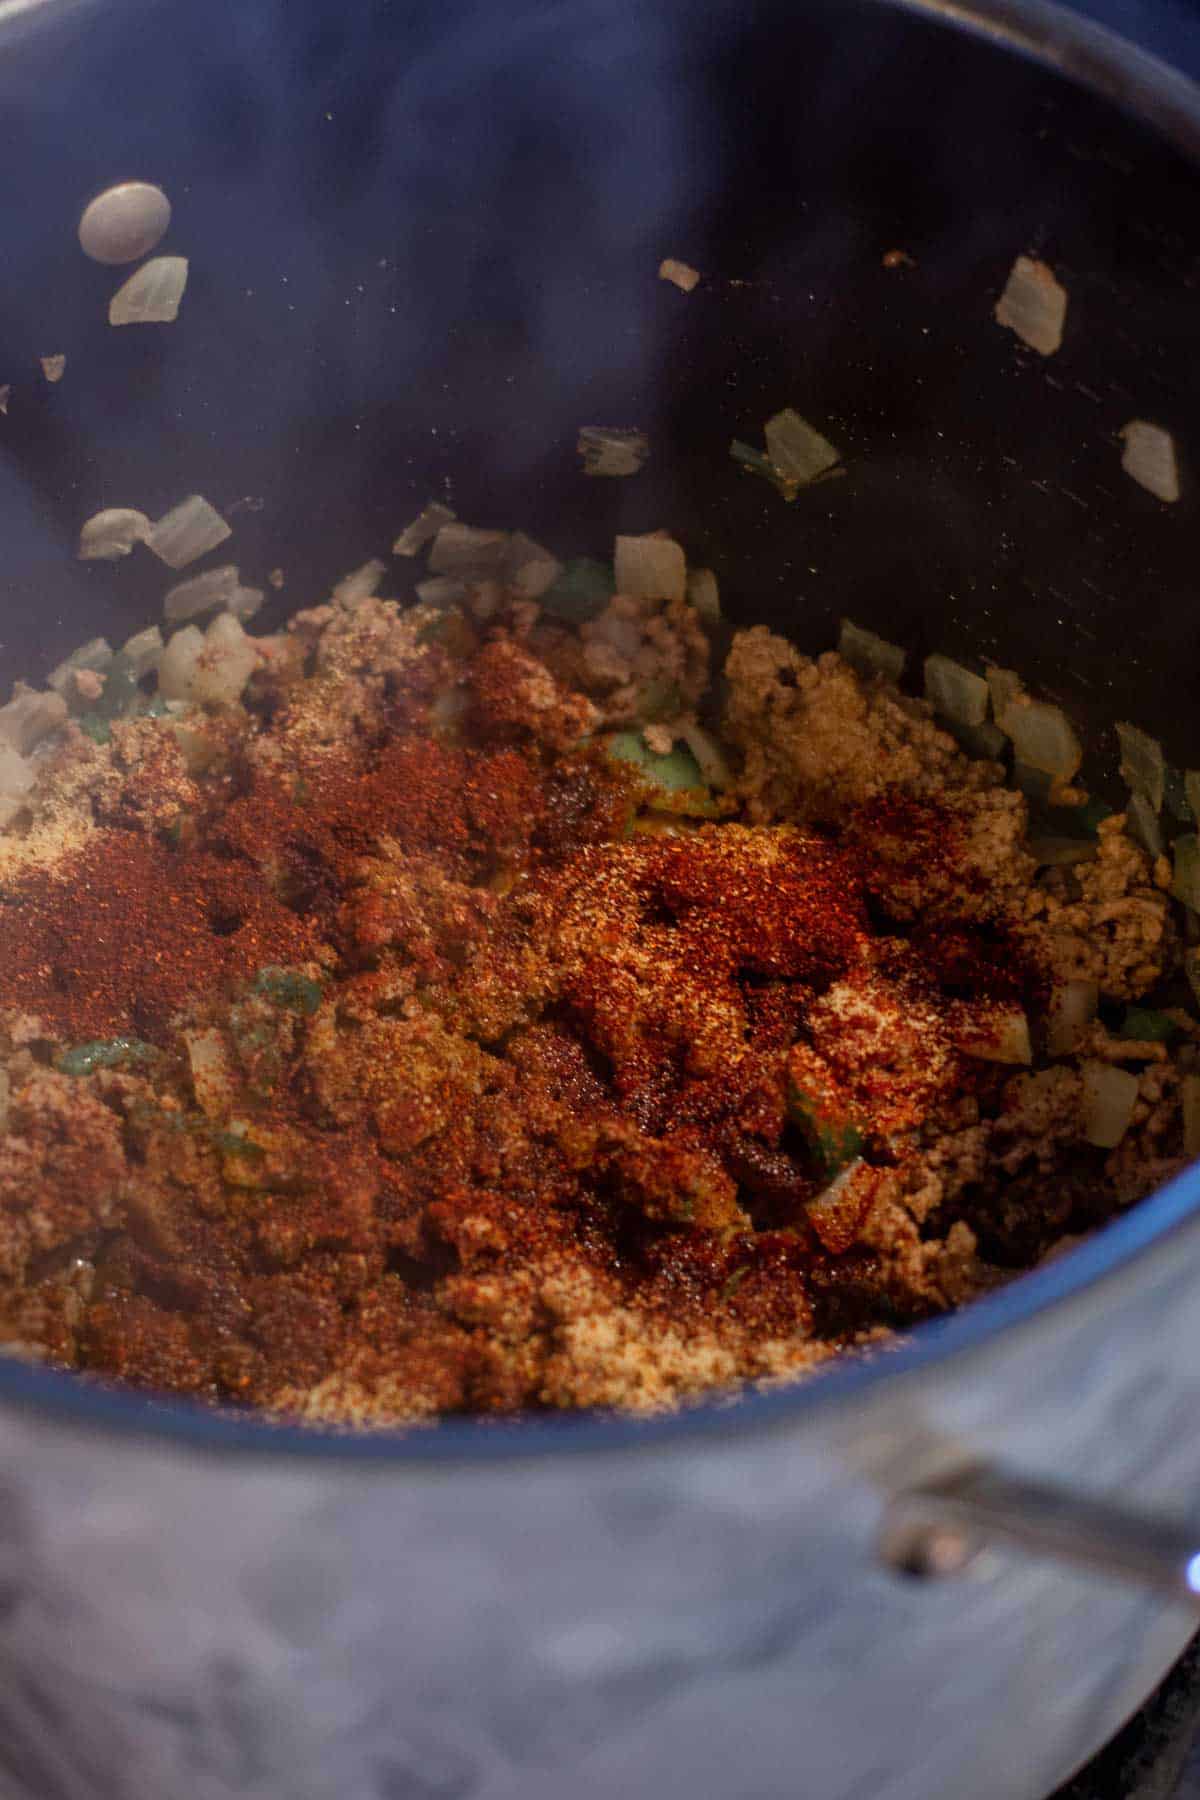 Chili seasoning sprinkled on top of browed ground beef and sausage in a stock pot.